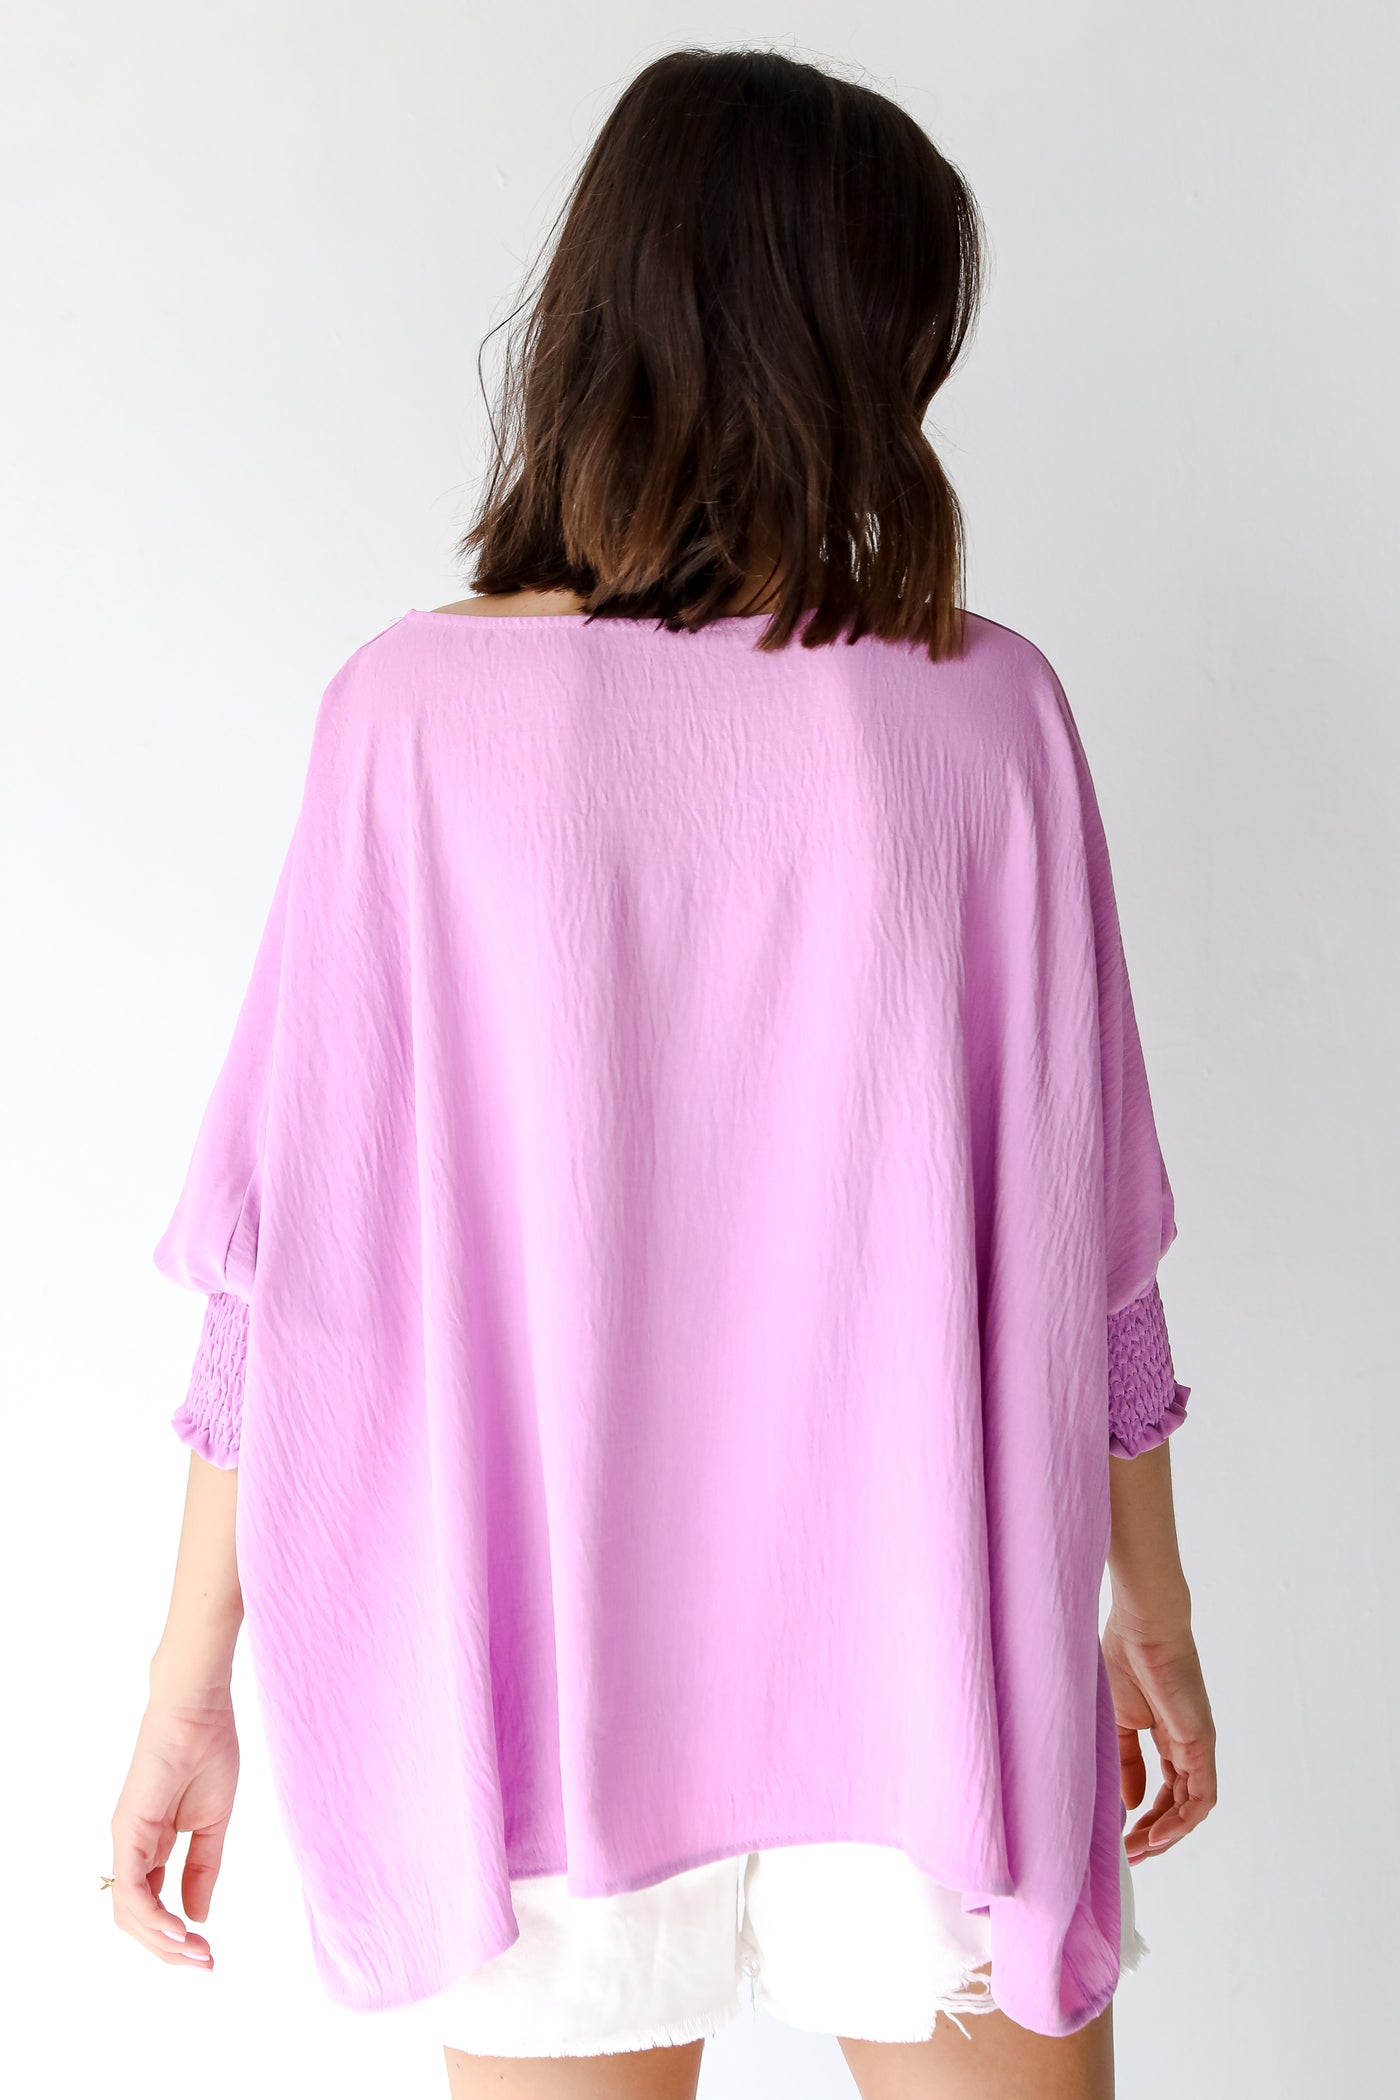 Blouse in lavender back view